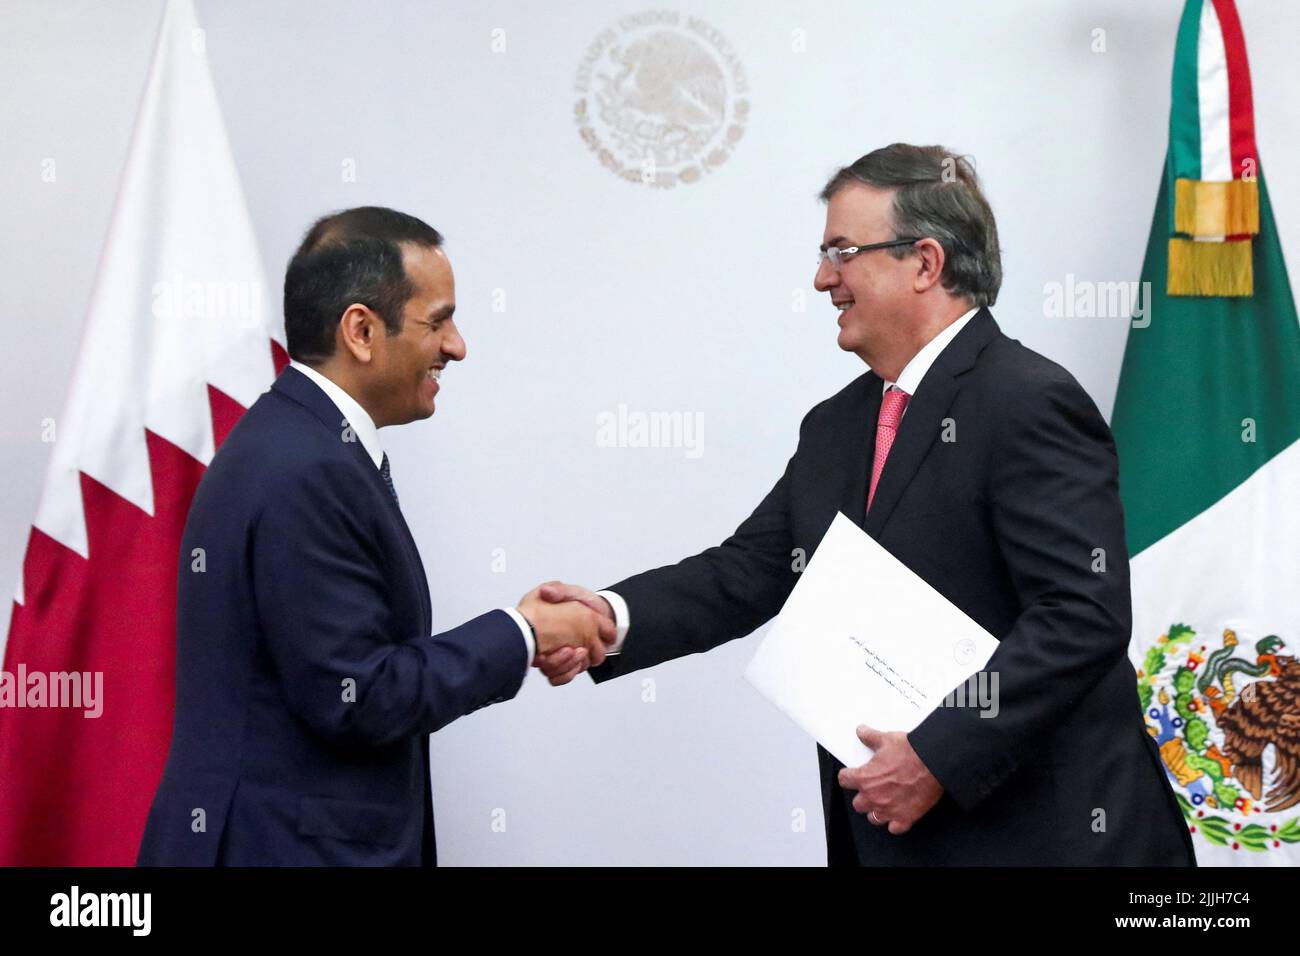 Qatar’s Foreign Minister, Mohammed bin Abdulrahman bin Jassim Al Than, and Mexico’s Foreign Minister, Marcelo Ebrard, shake hands after they addressed they media at the Foreign Ministry Building (SRE) in Mexico City, Mexico, July 26, 2022. REUTERS/Edgard Garrido Stock Photo